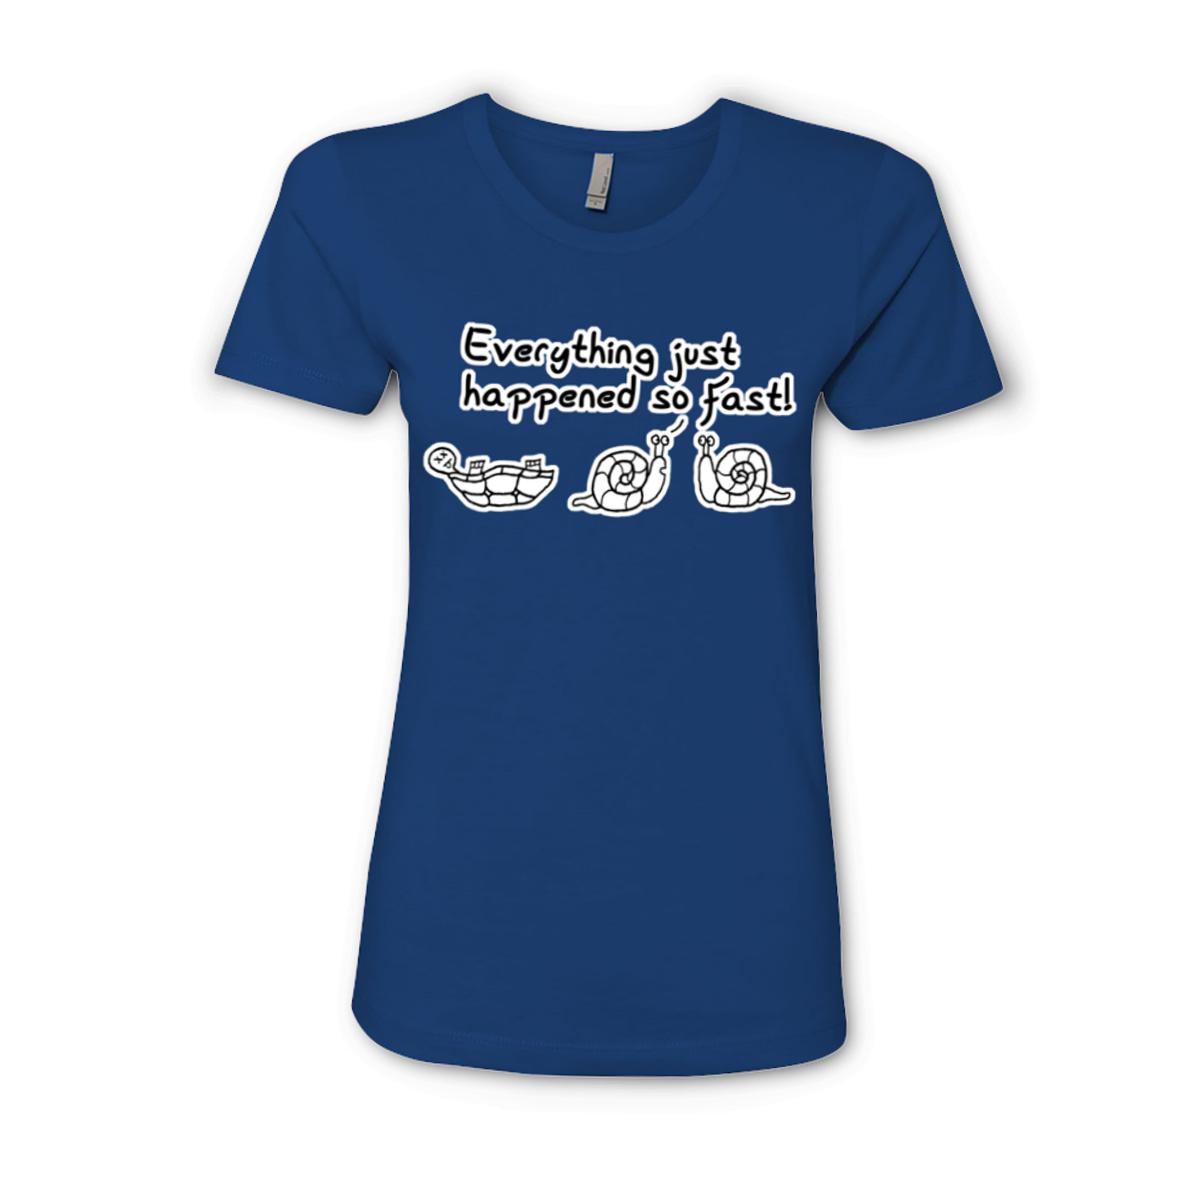 Happened So Fast Ladies' Boyfriend Tee Double Extra Large royal-blue